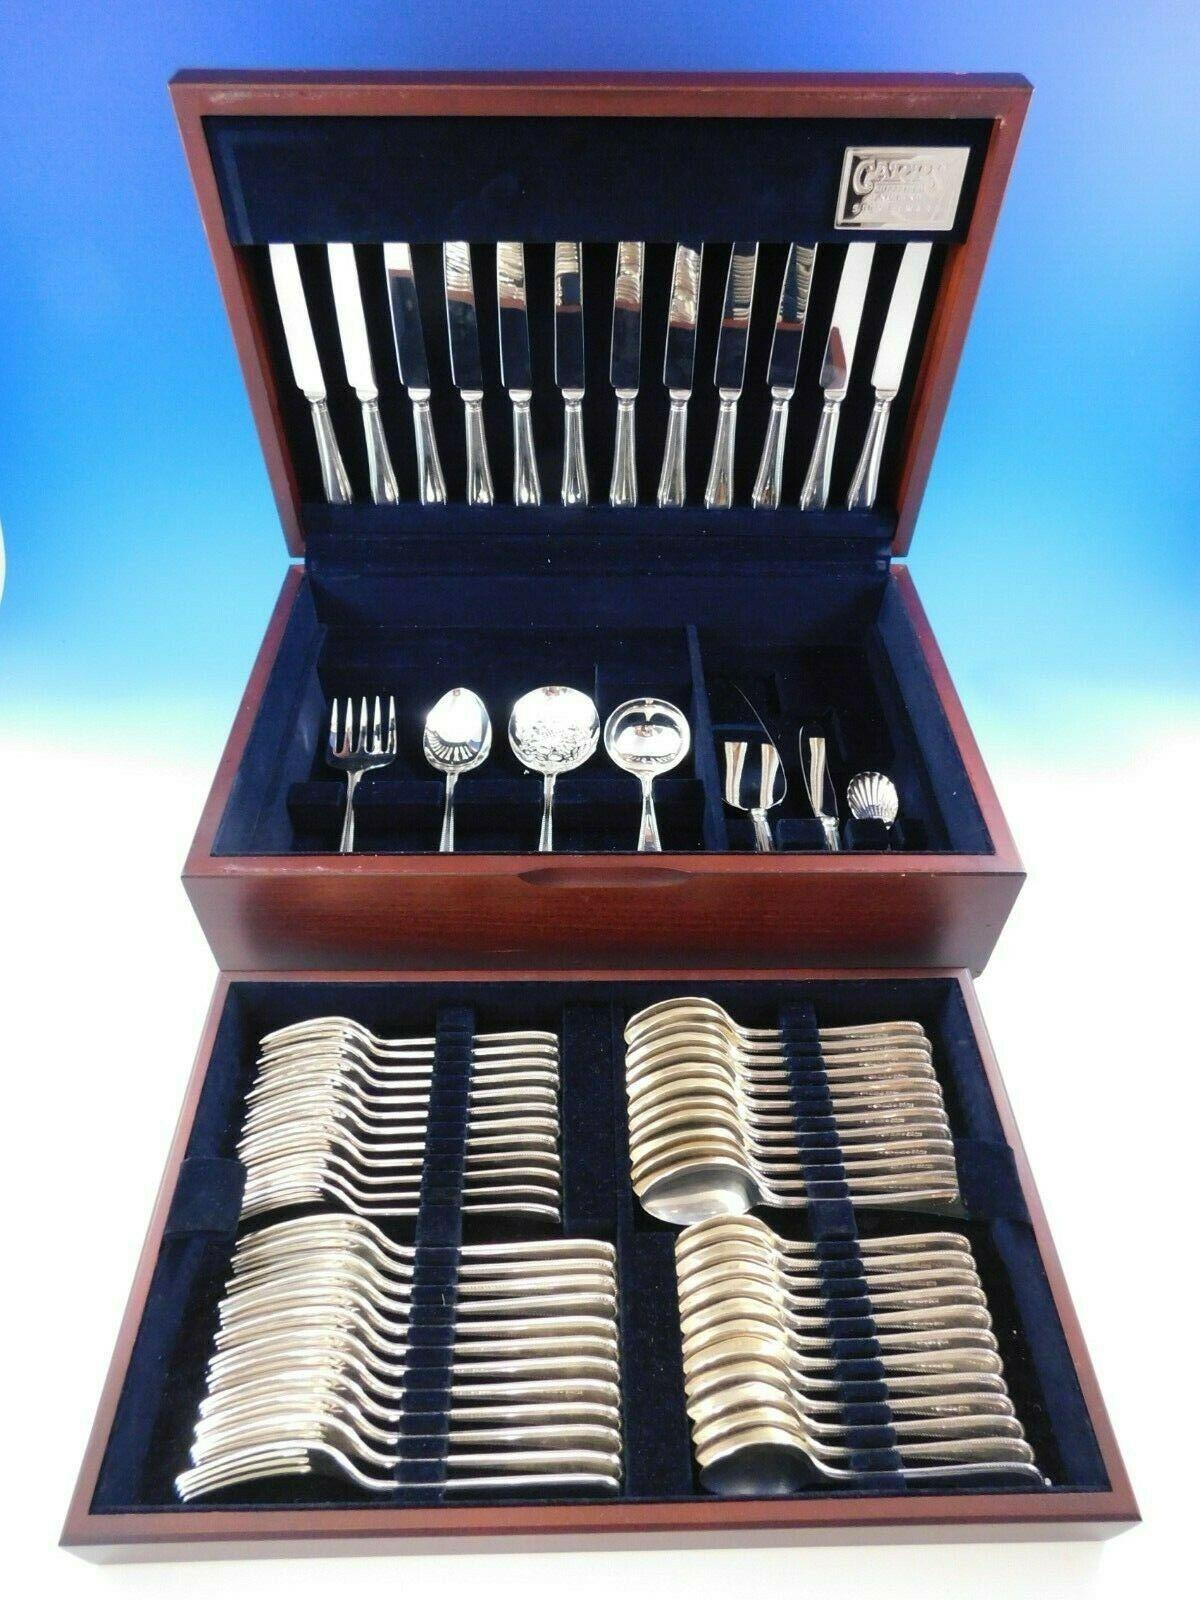 Beautiful bead, round by Carrs sterling silver flatware set in vintage storage chest - 73 pieces. This set includes:

12 dinner knives, 9 3/4